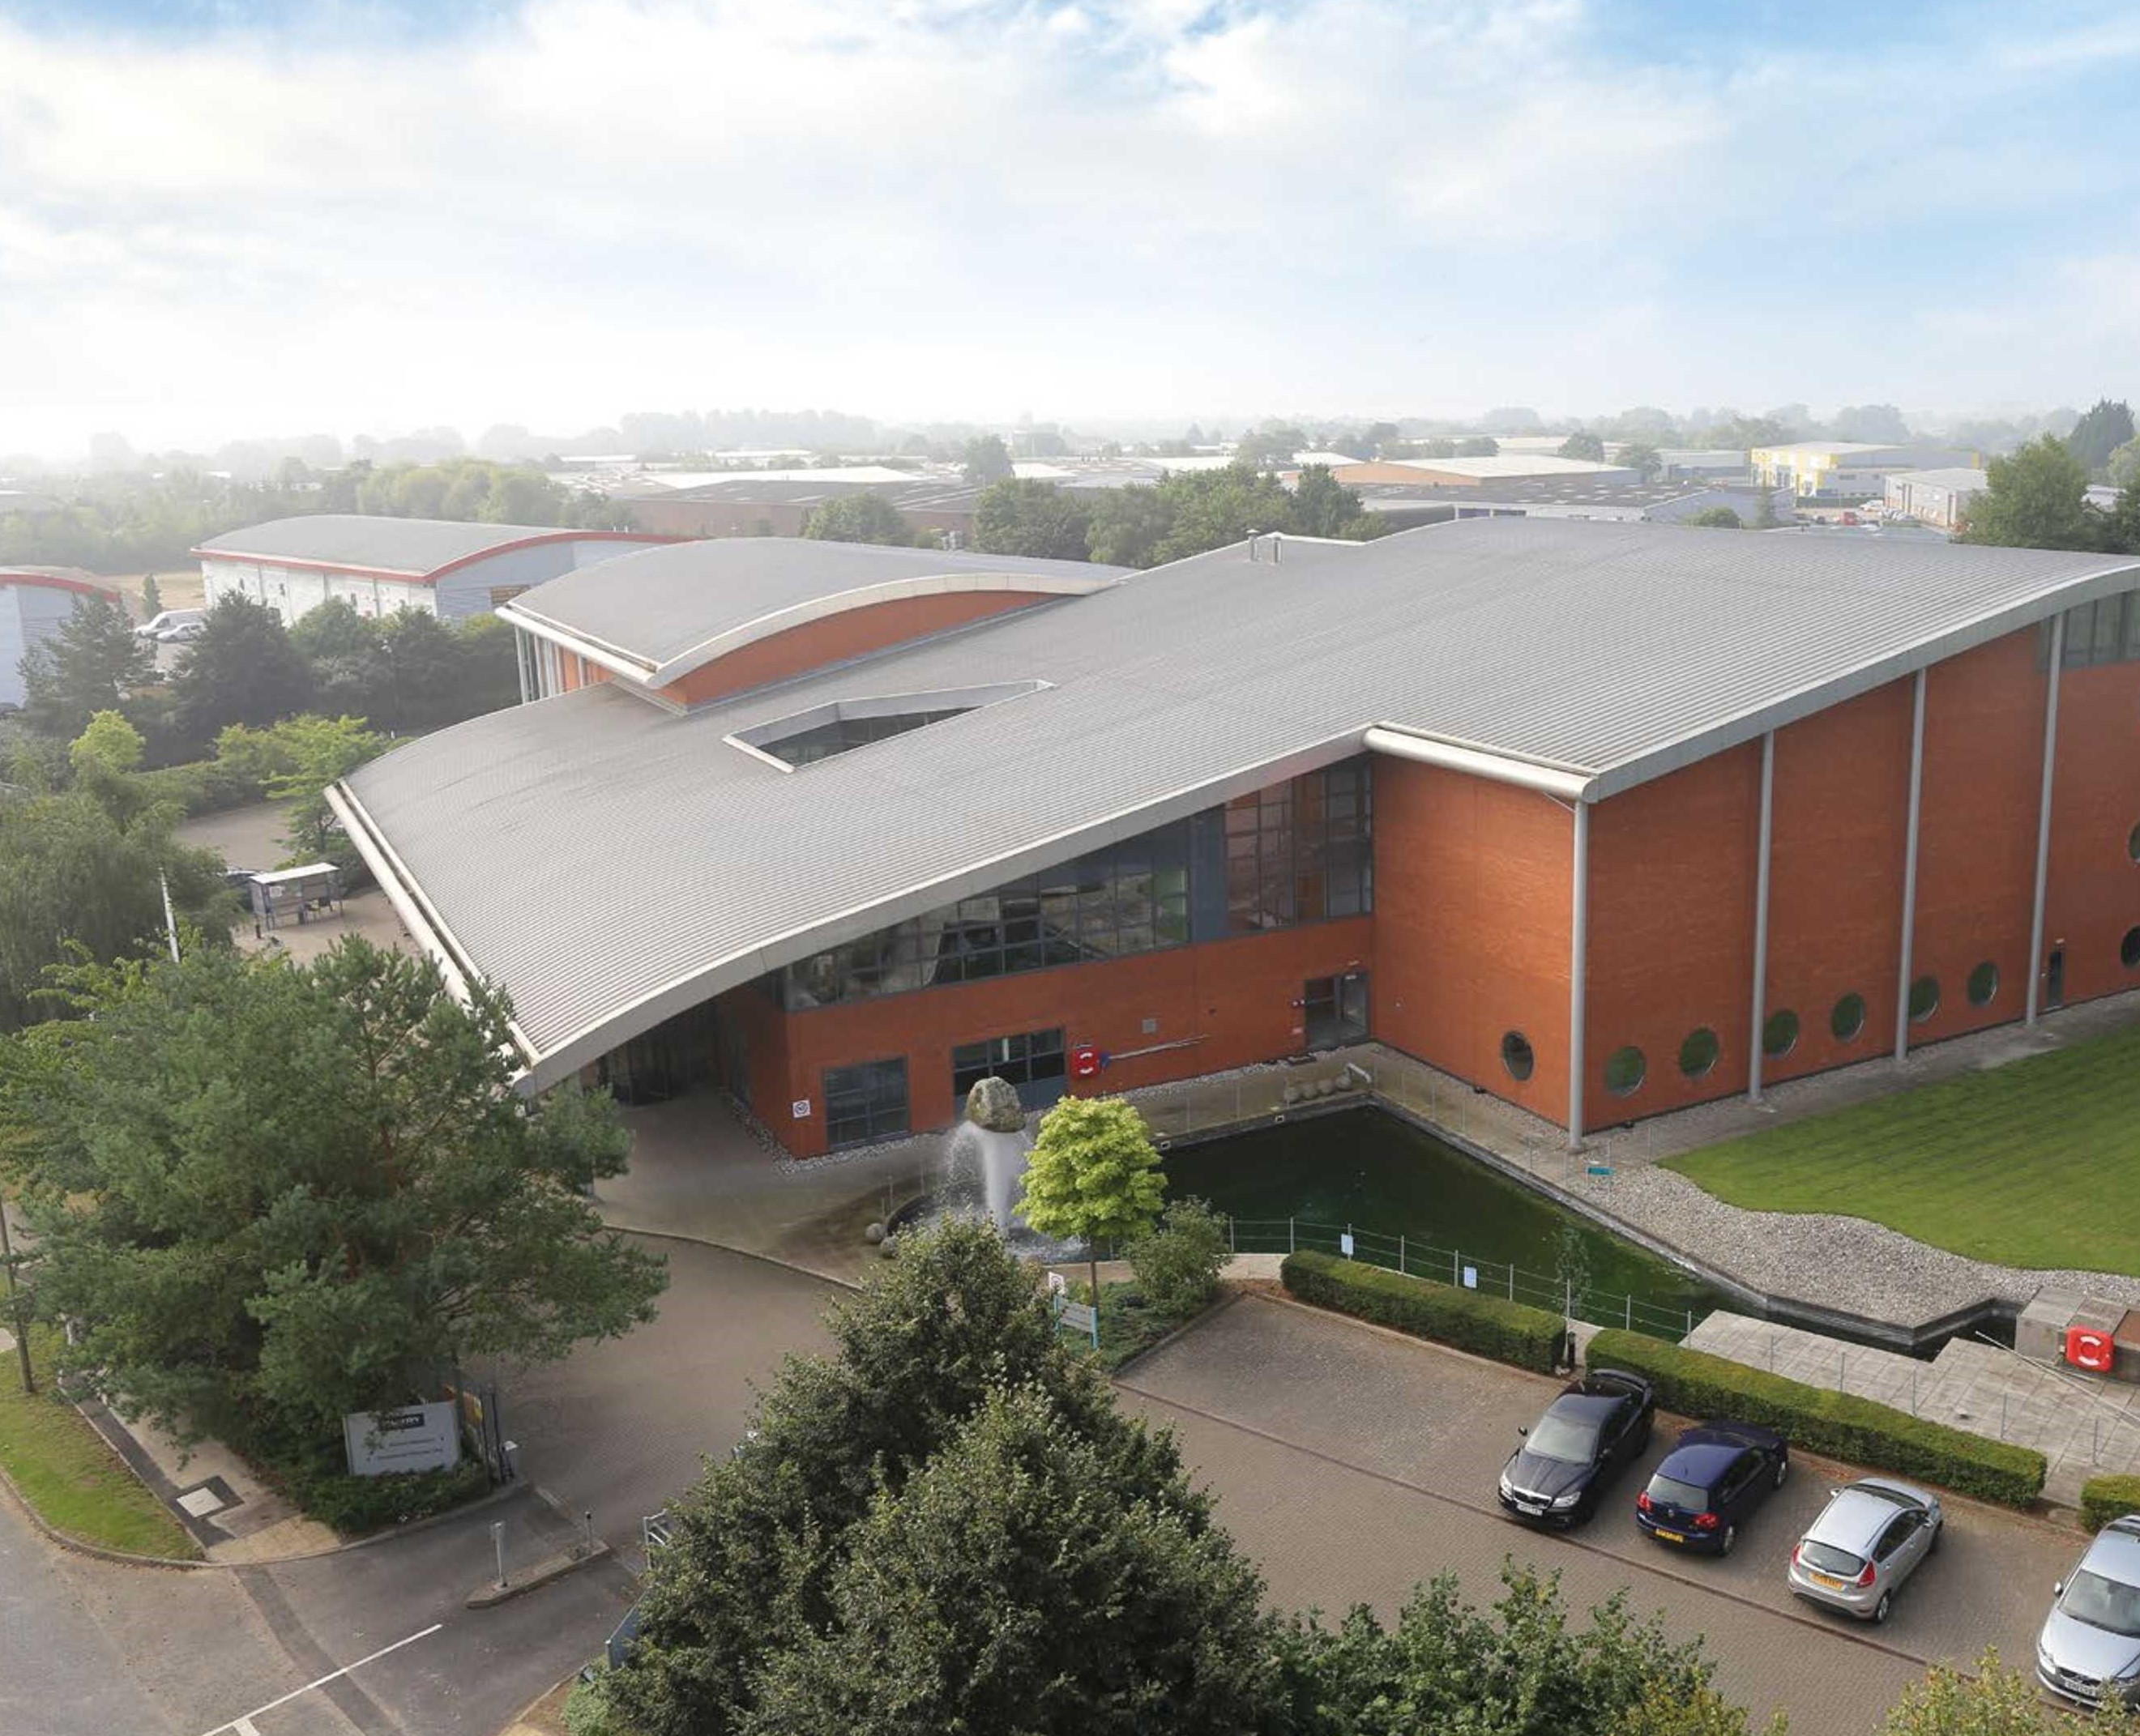 Acquisition of long leasehold interest by freeholder of Abingdon Business Park